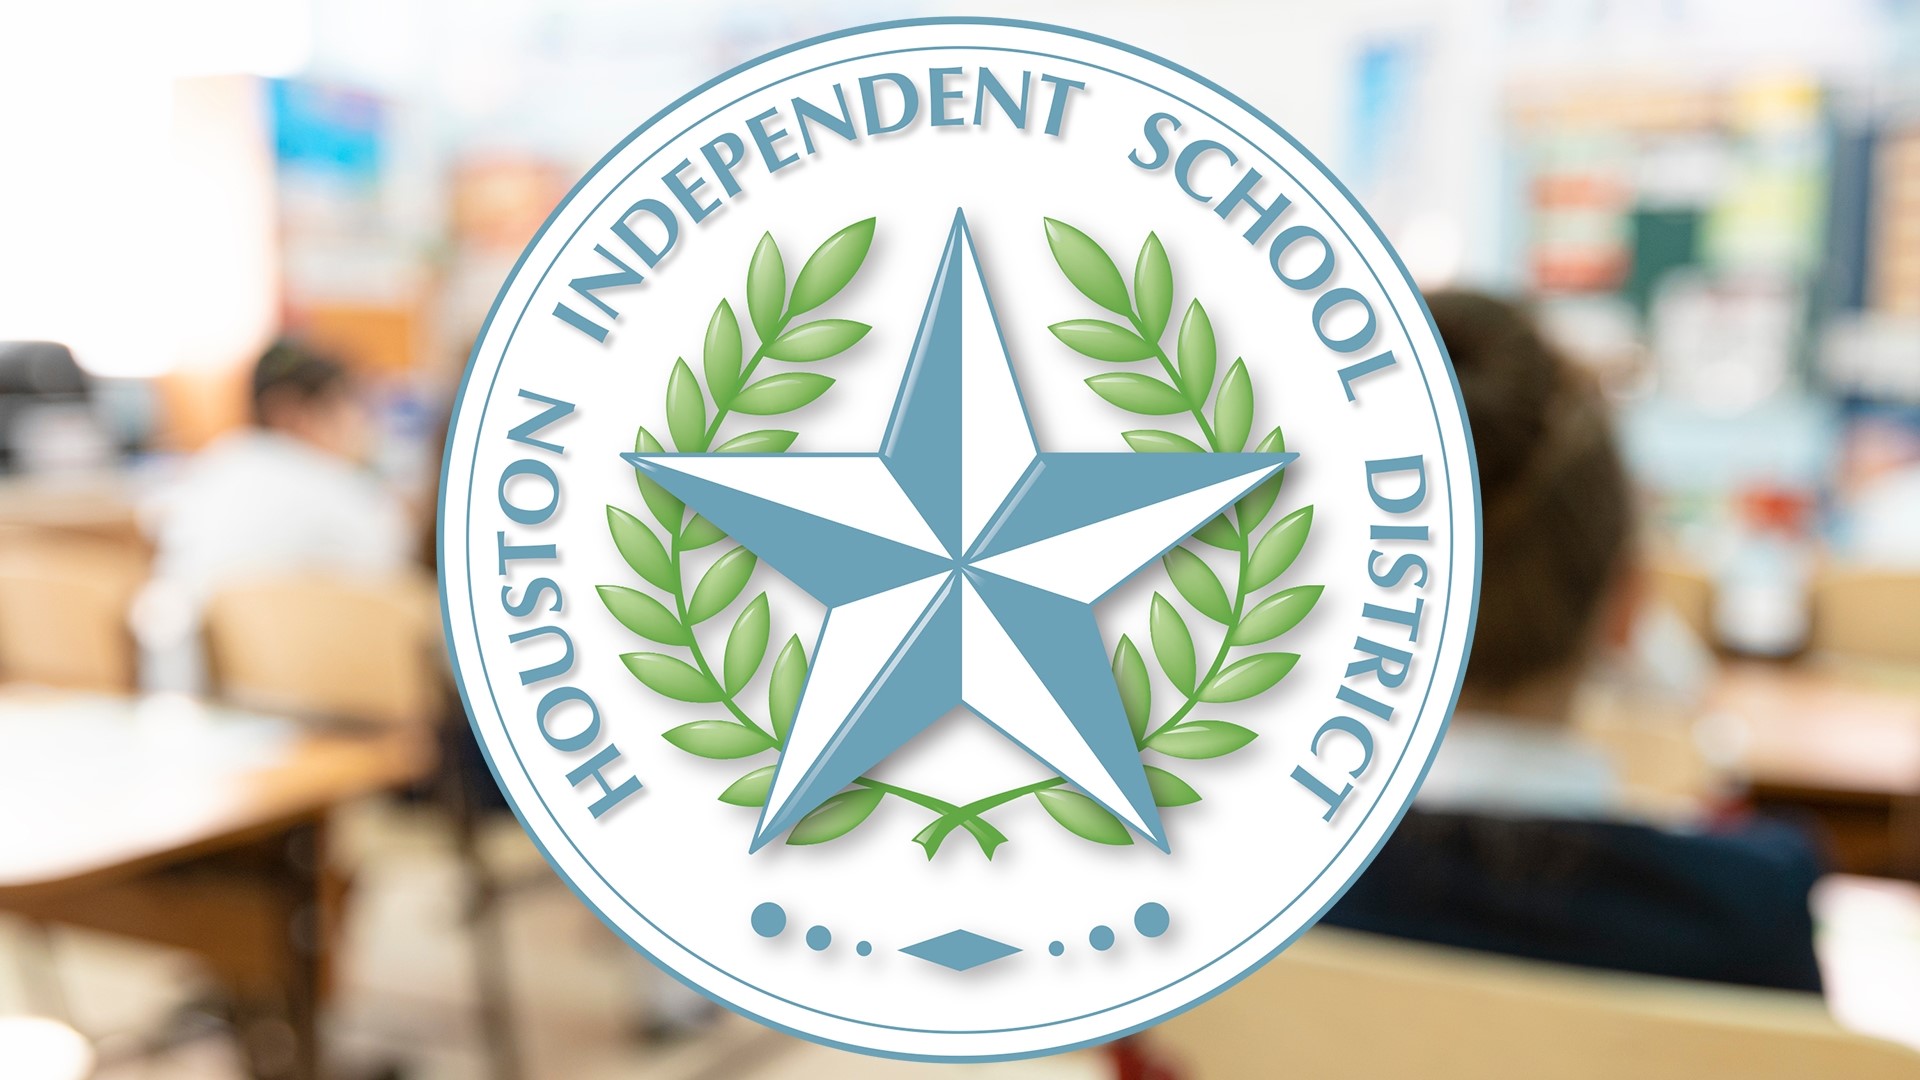 "Our focus is clear, and we will continue to do the necessary work to ensure continued academic achievement for all HISD students," the HISD superintendent said.